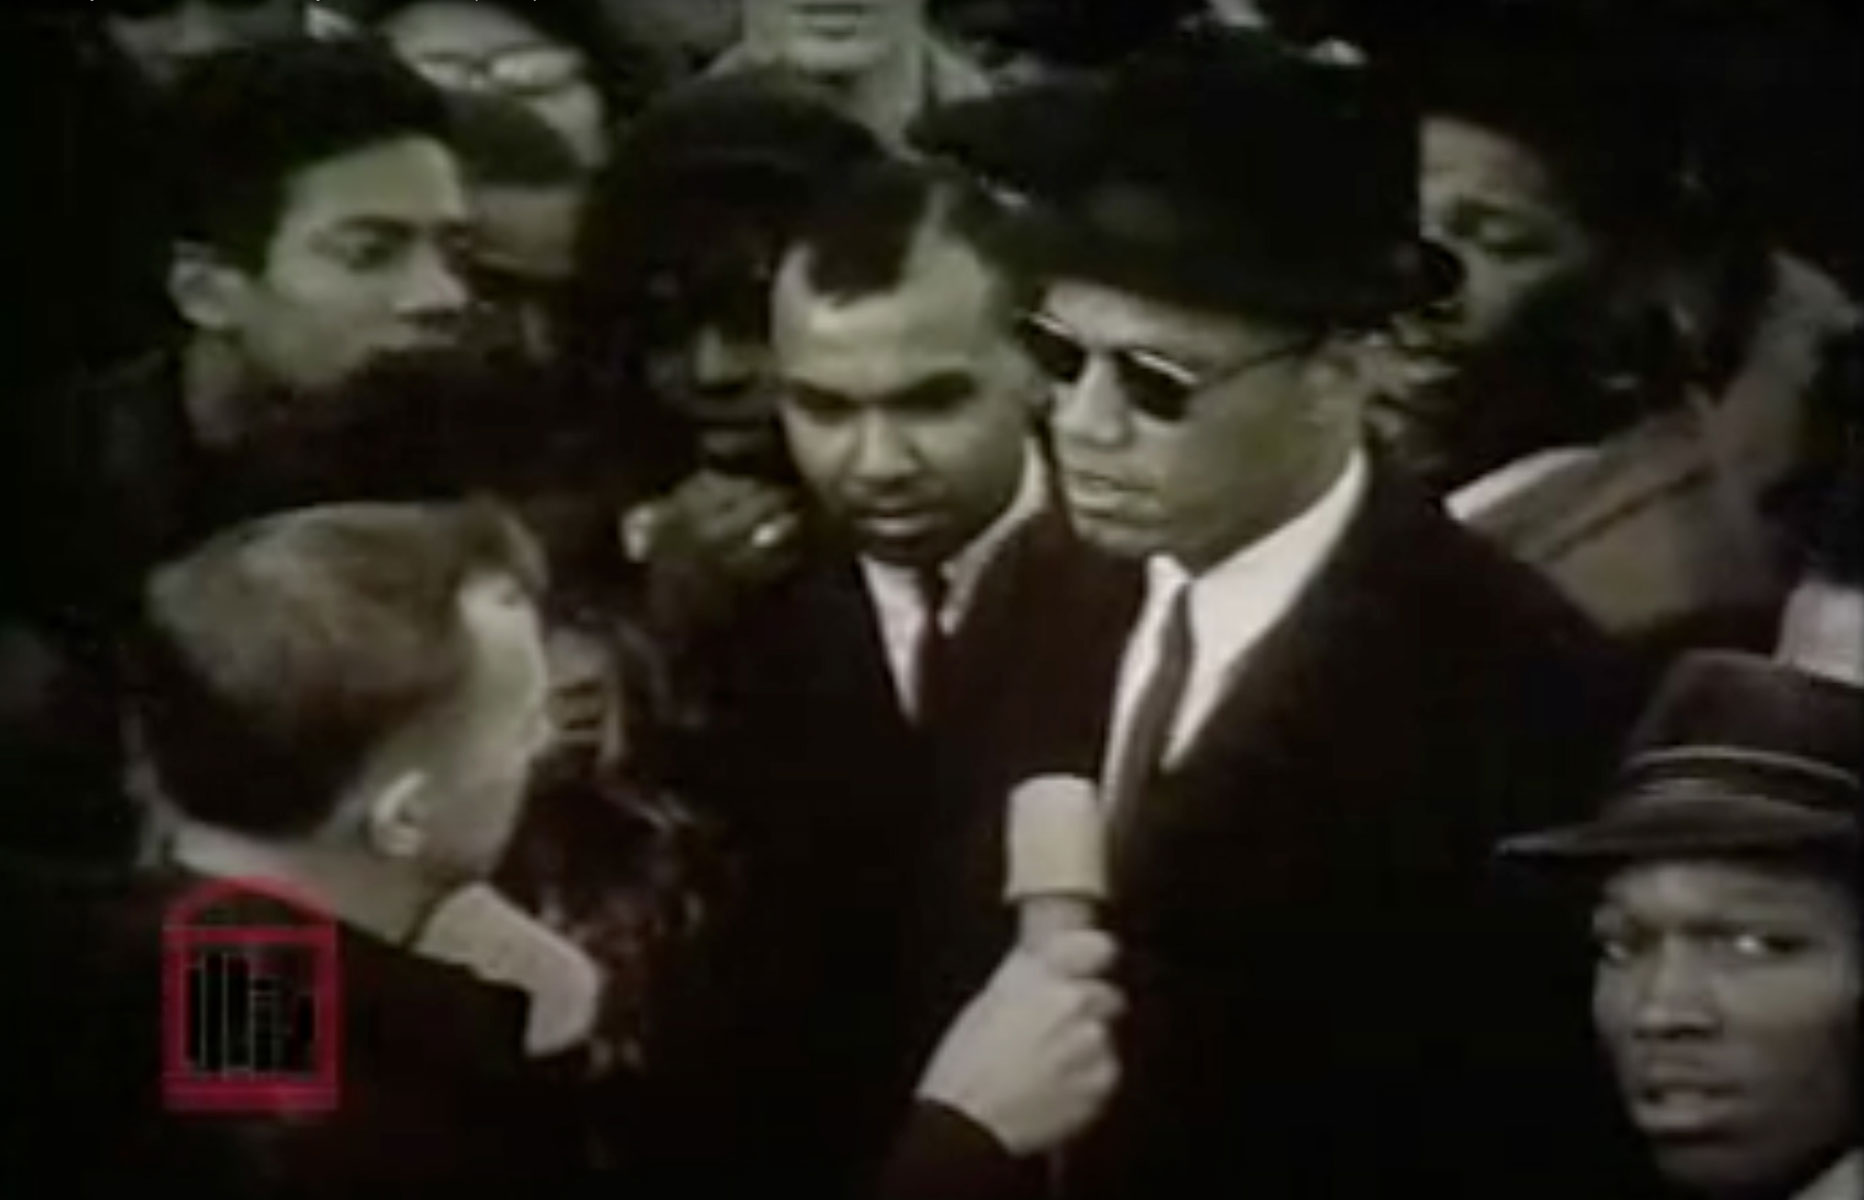 Malcolm X is interviewed while standing in front of a crowd of people.